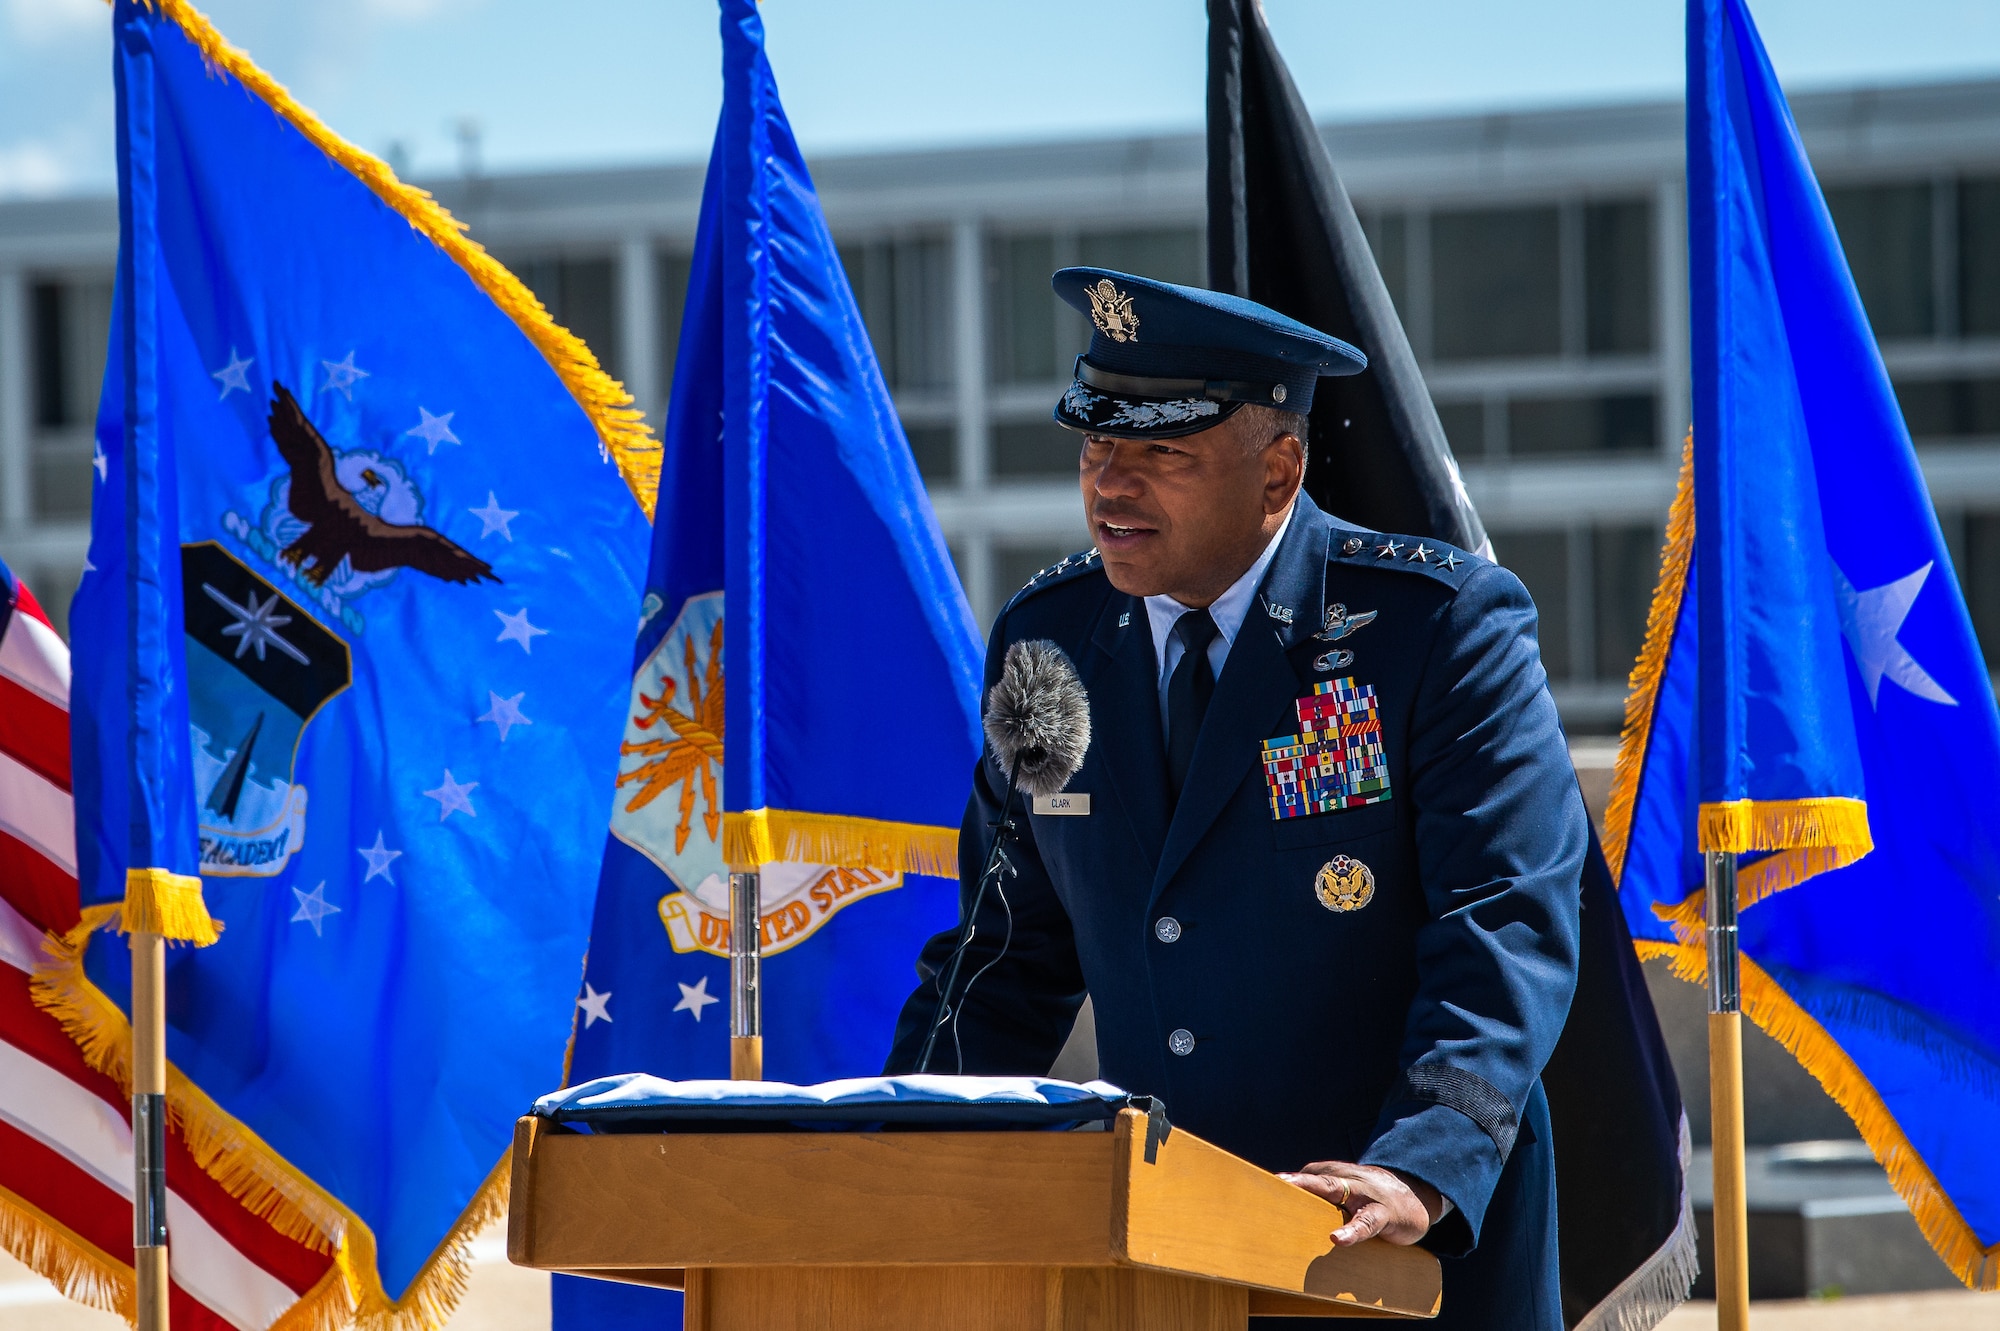 Lieutenant General Richard Clark, U.S. Air Force Academy superintendent, highlights the bravery of the Spirit 03 aircrew during a dedication ceremony of an AC-130H Spectre gunship sculpture, at the Air Force Academy Colorado, May 5, 2023.